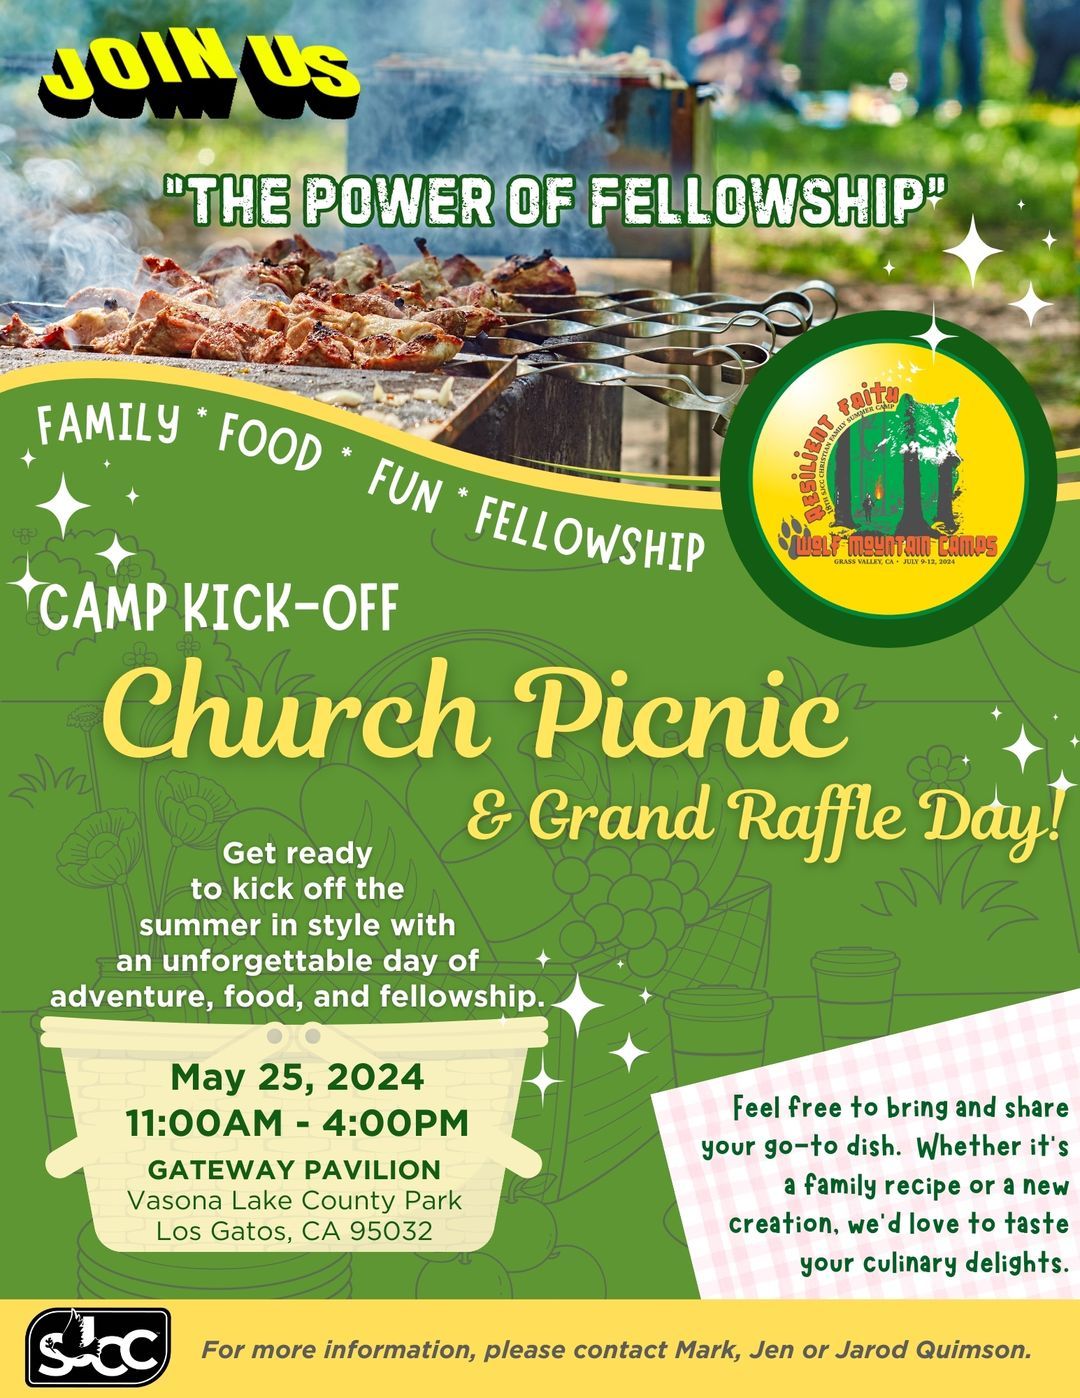 SJCC Family Annual Picnic  - "The Power Of Fellowship!" - 05.25.24-11:00 a.m.